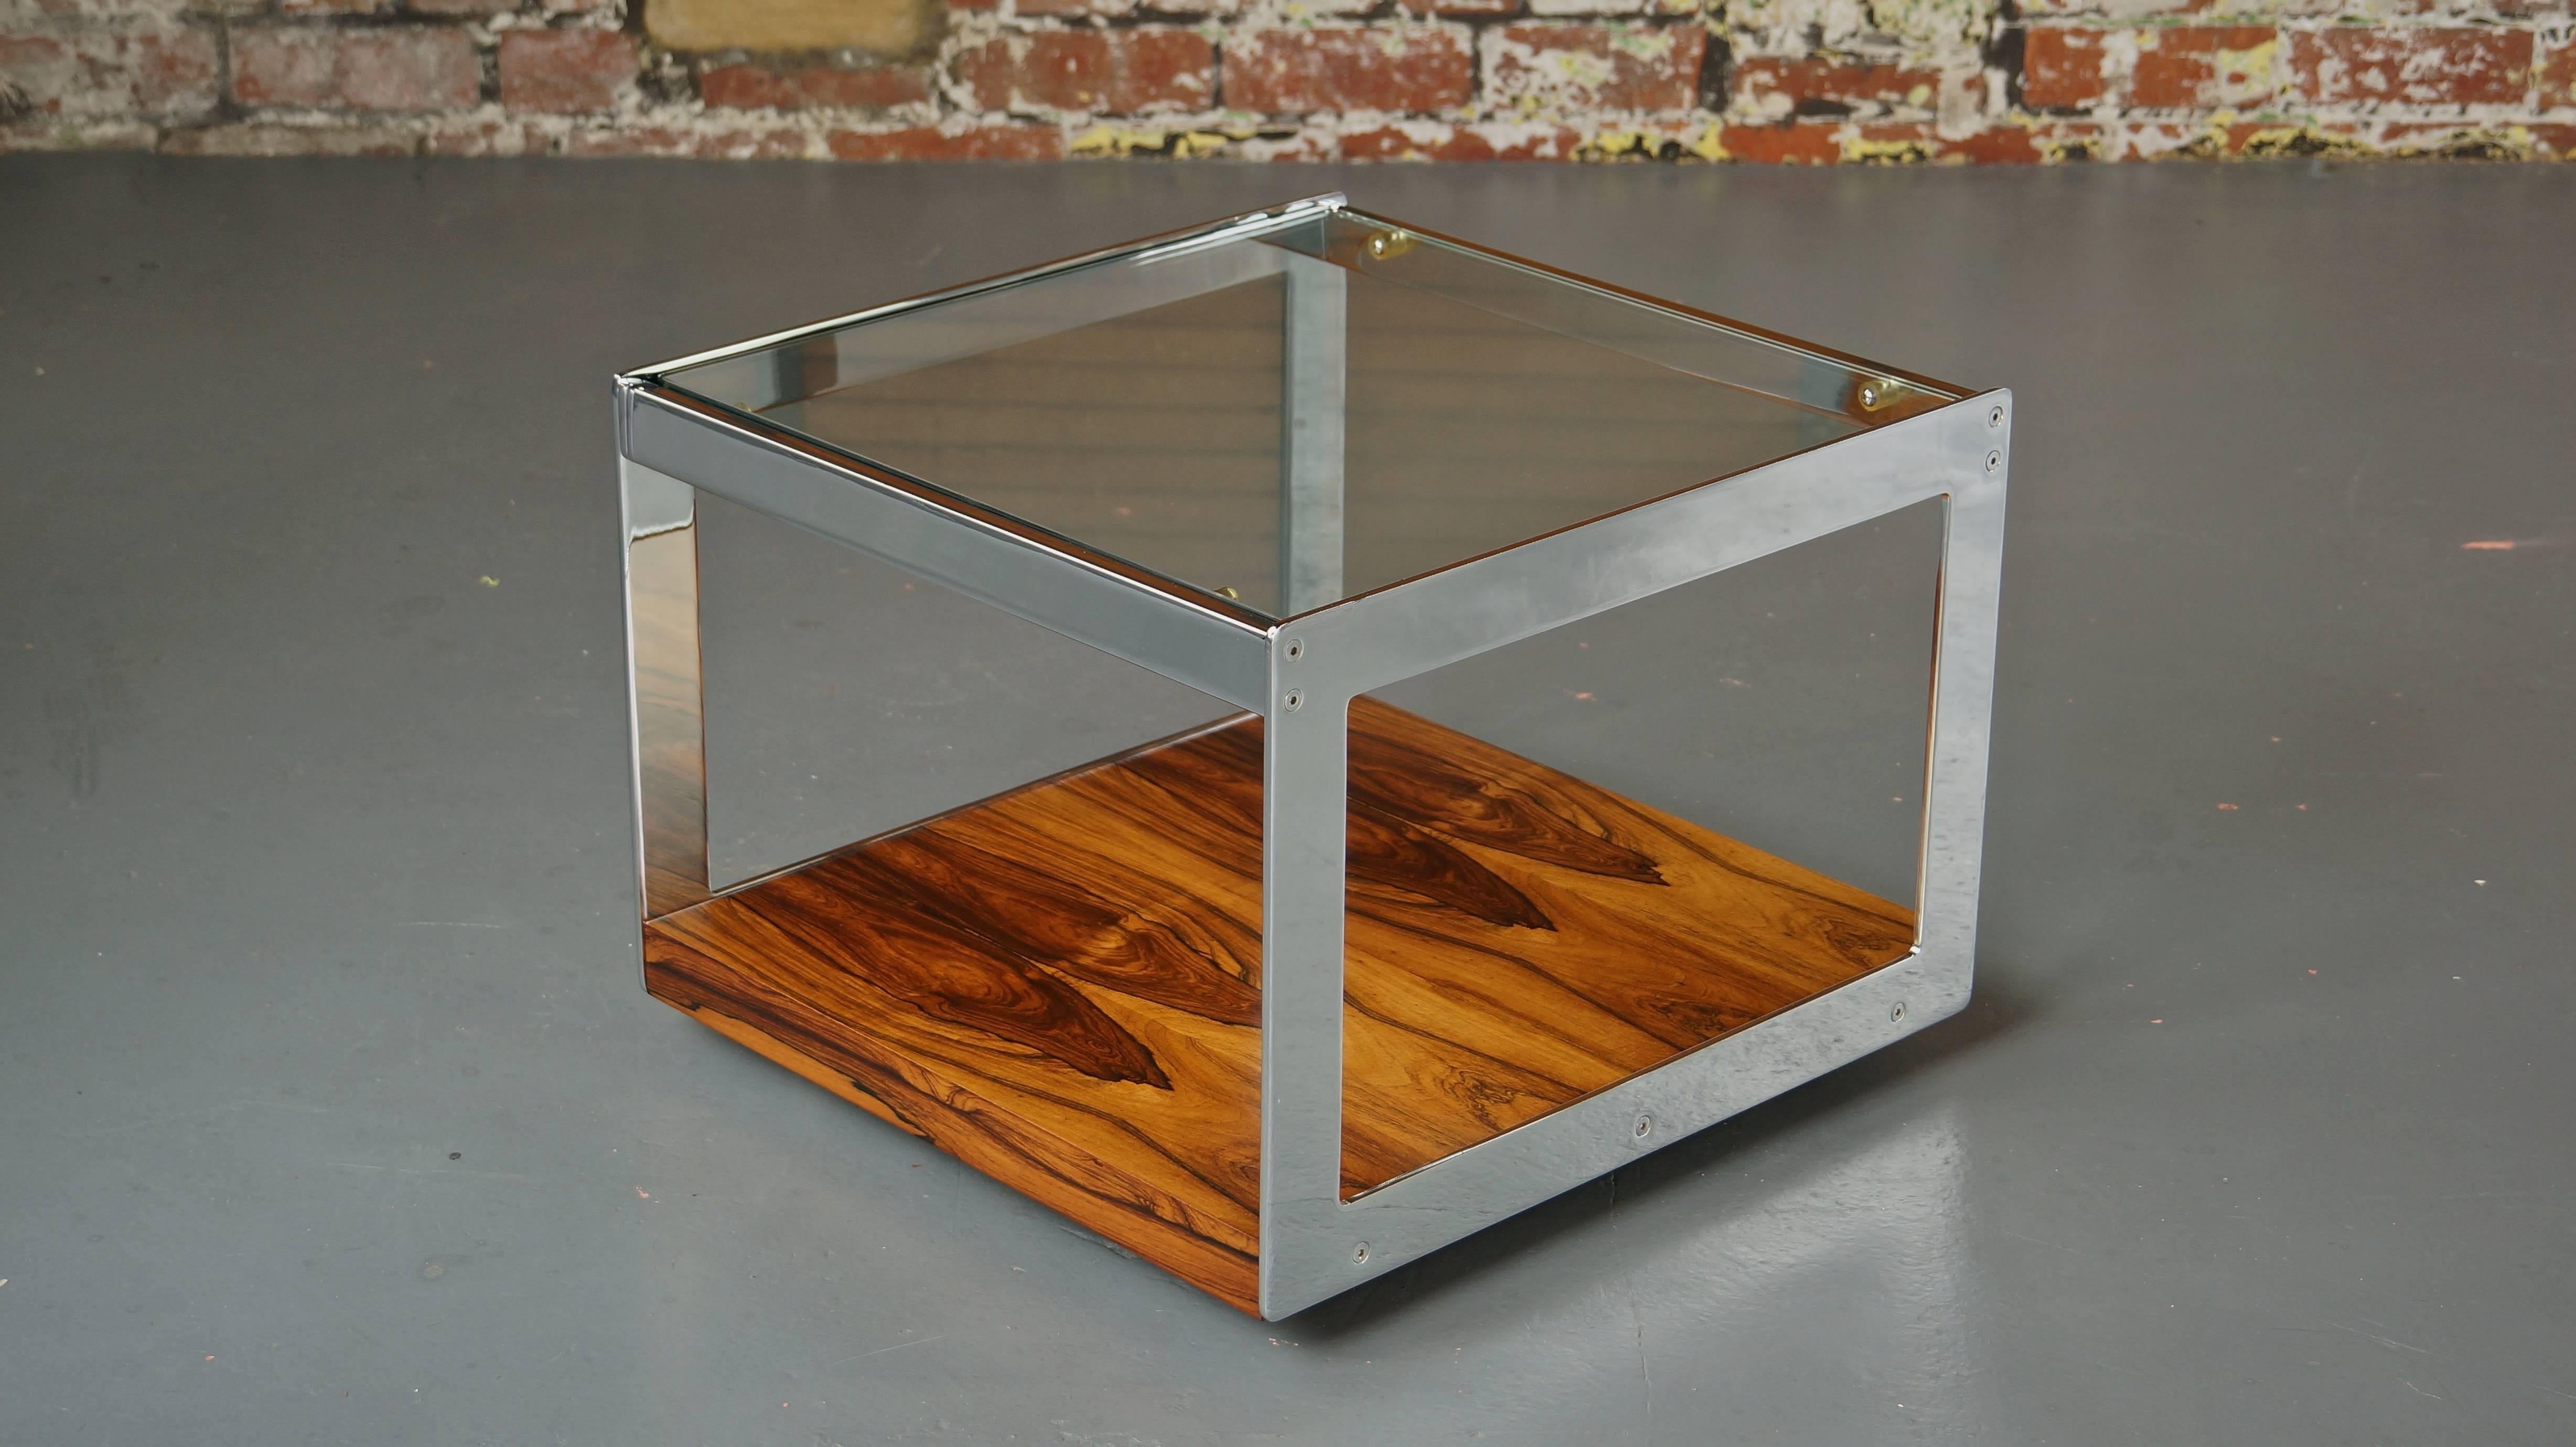 Rare 1970s chrome and rosewood coffee, side or end table
Designed by Richard Young for Merrow Associates, England

Exceptionally rare and exceedingly high quality piece offered in outstanding condition throughout. By one of the best design houses